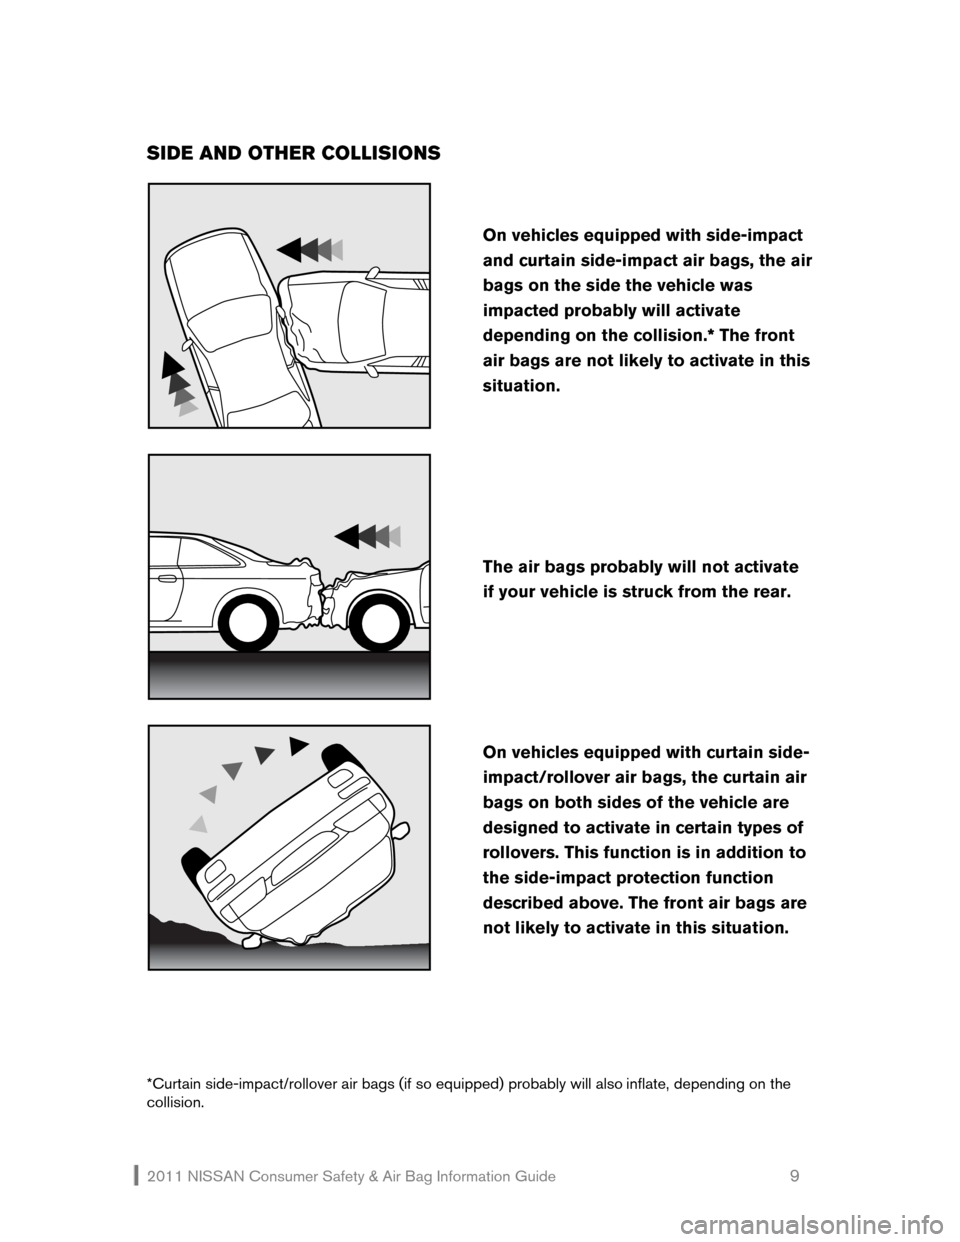 NISSAN CUBE 2011 3.G Consumer Safety Air Bag Information Guide 2011 NISSAN Consumer Safety & Air Bag Information Guide                                                       9 
SIDE AND OTHER COLLISIONS 
 
 
 
 
 
*Curtain side-impact/rollover air bags (if so equi